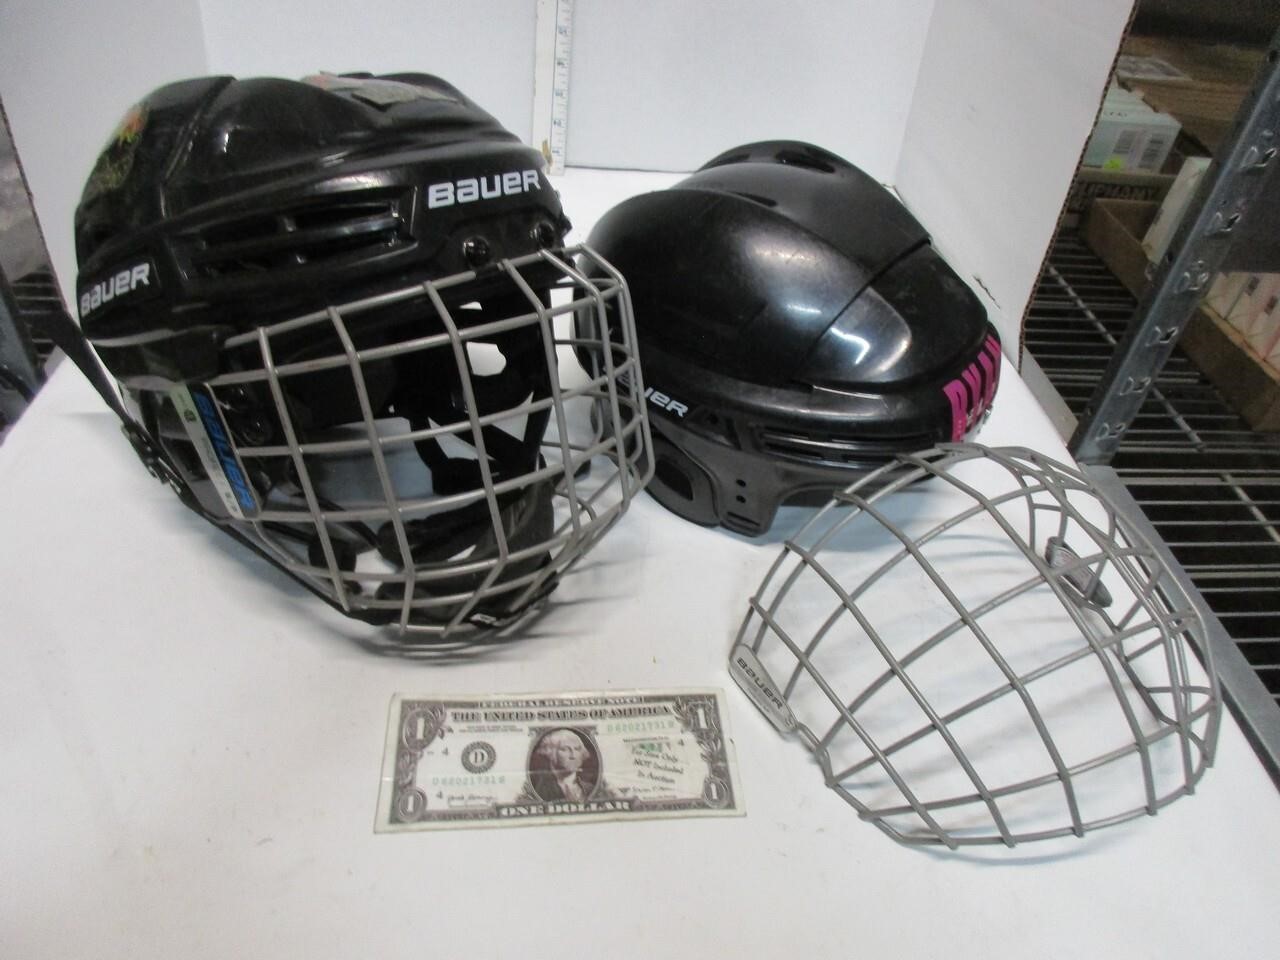 2) Bauer hockey helmets with face shields